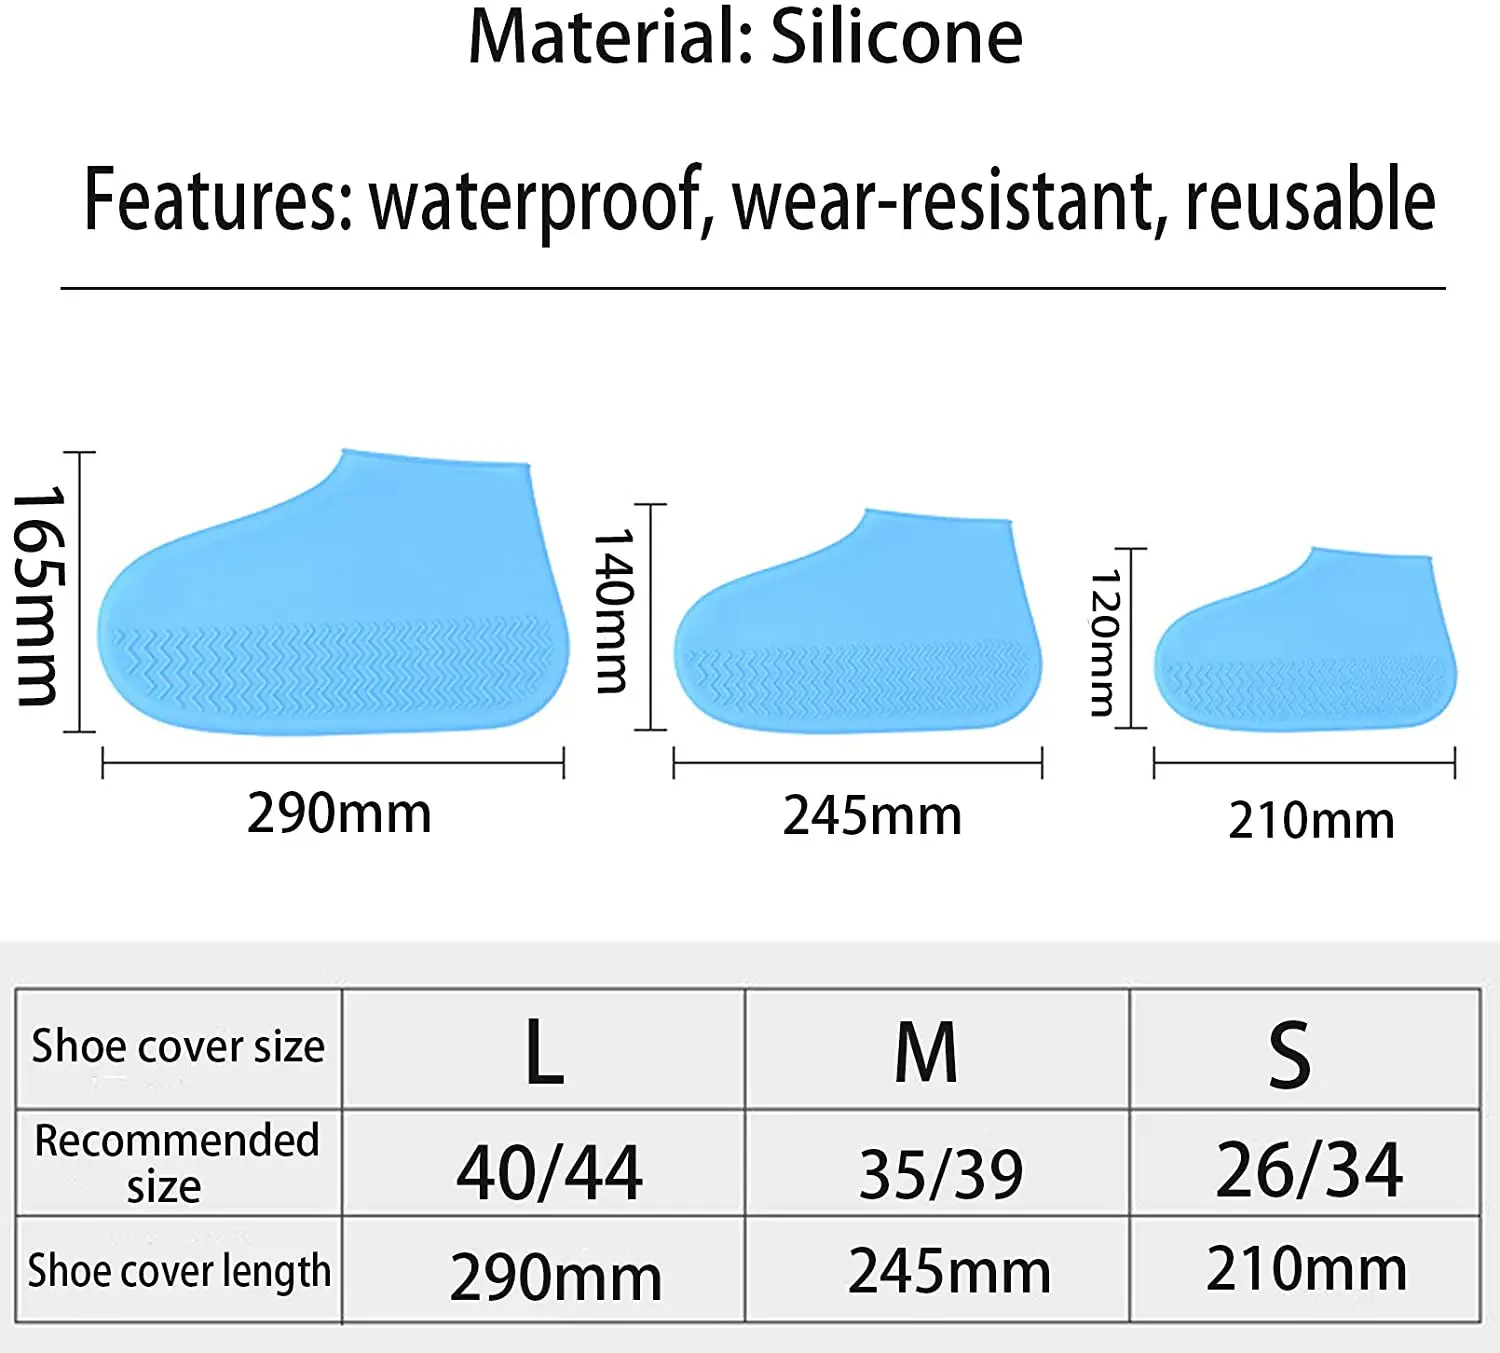 2022New Rain Boots Waterproof Shoe Cover Silicone Unisex Outdoor Waterproof Non-Slip Non-slip Wear-Resistant Reusable Shoe Cover images - 6